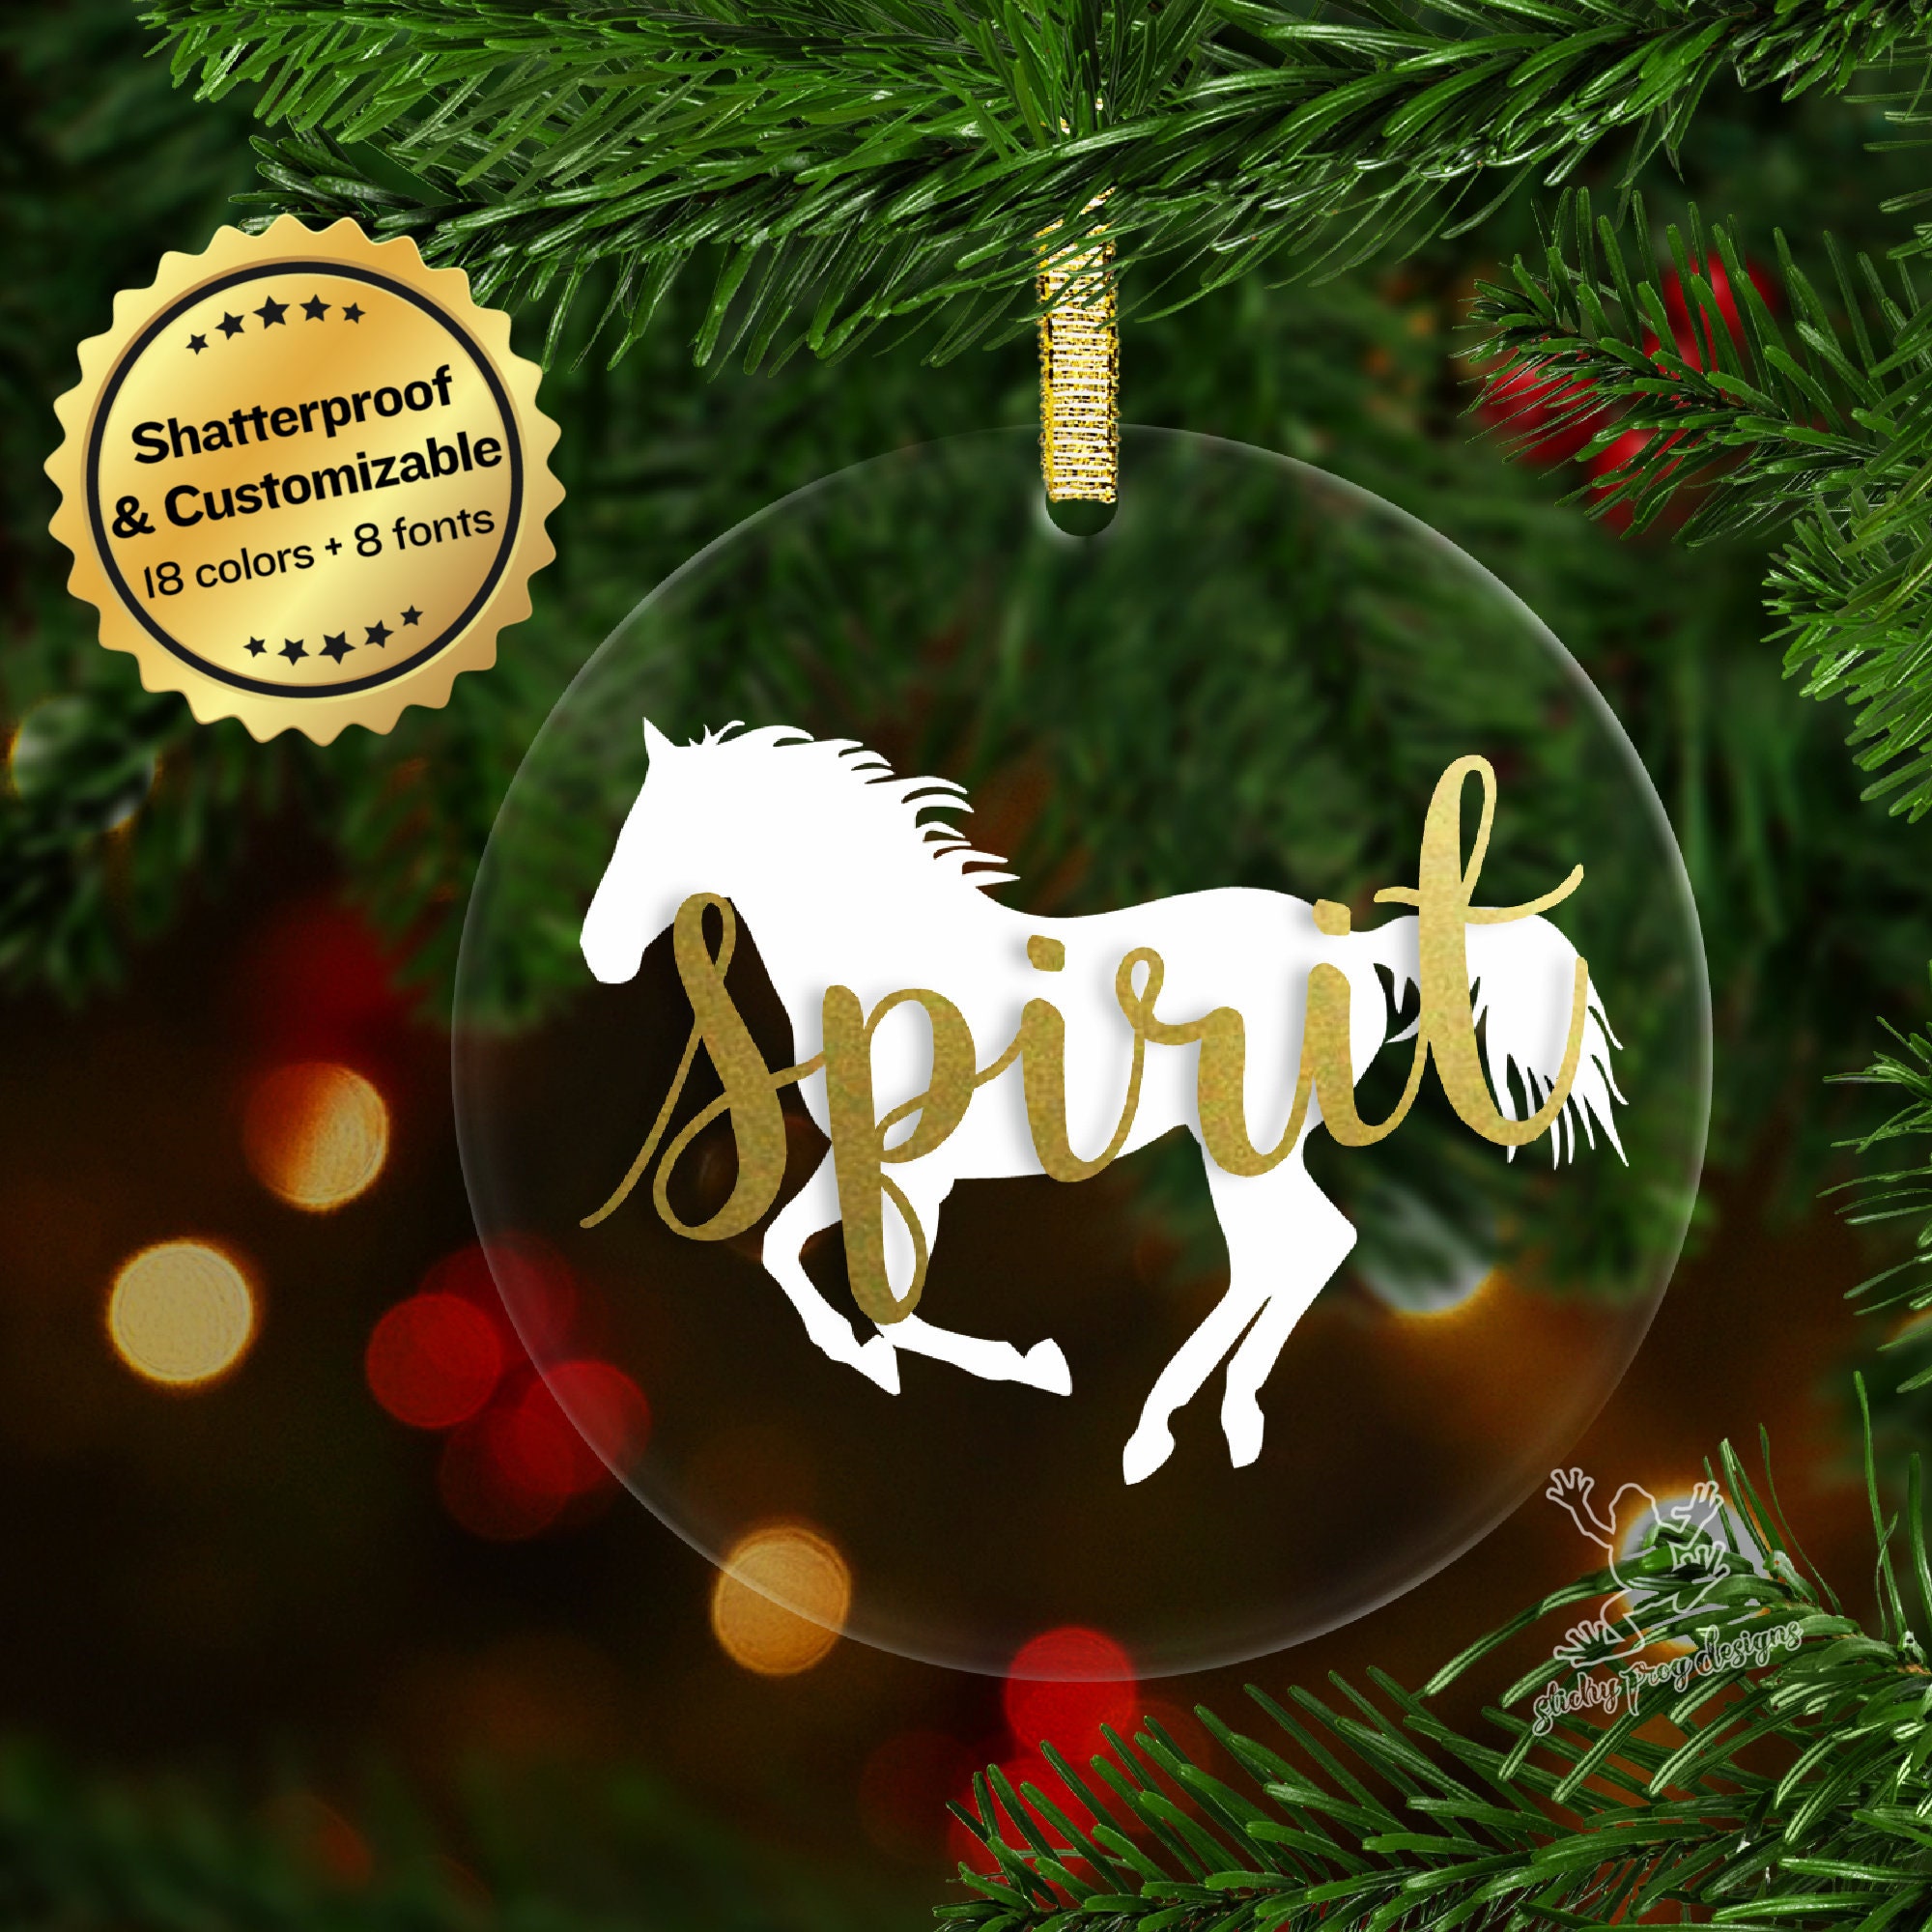 Gift Ideas for Horse Lovers under $10 from Triple Mountain – Triple  Mountain Model Horses